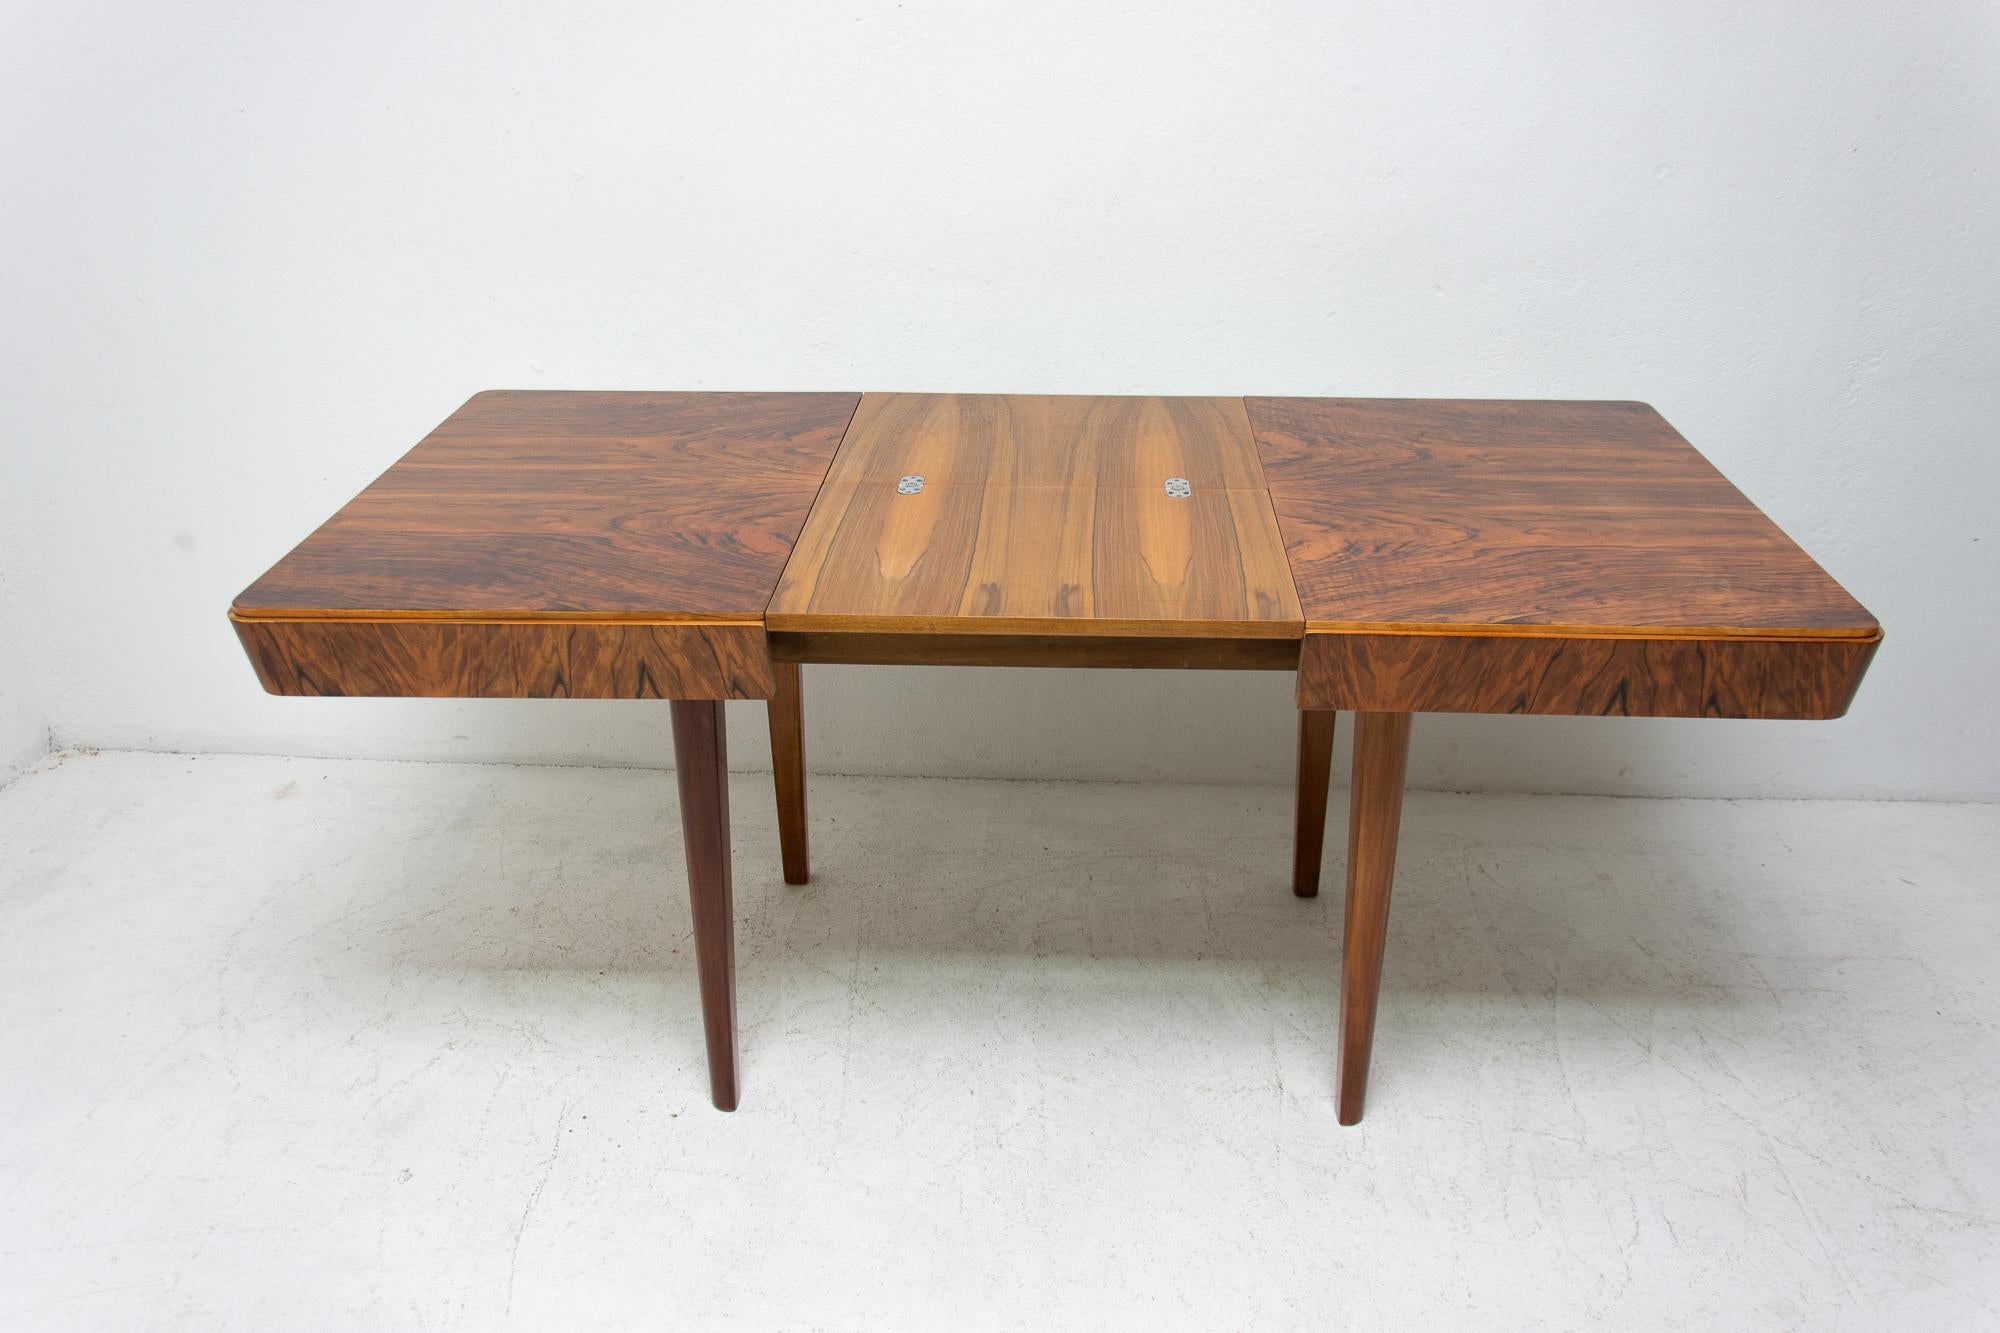 This adjustable dining table was designed and made in the 1950s in the former Czechoslovakia. It was designed by Jindřich Halabala. The material is a combination of solid wood and walnut veneer. It was professionally restored. The wood has been